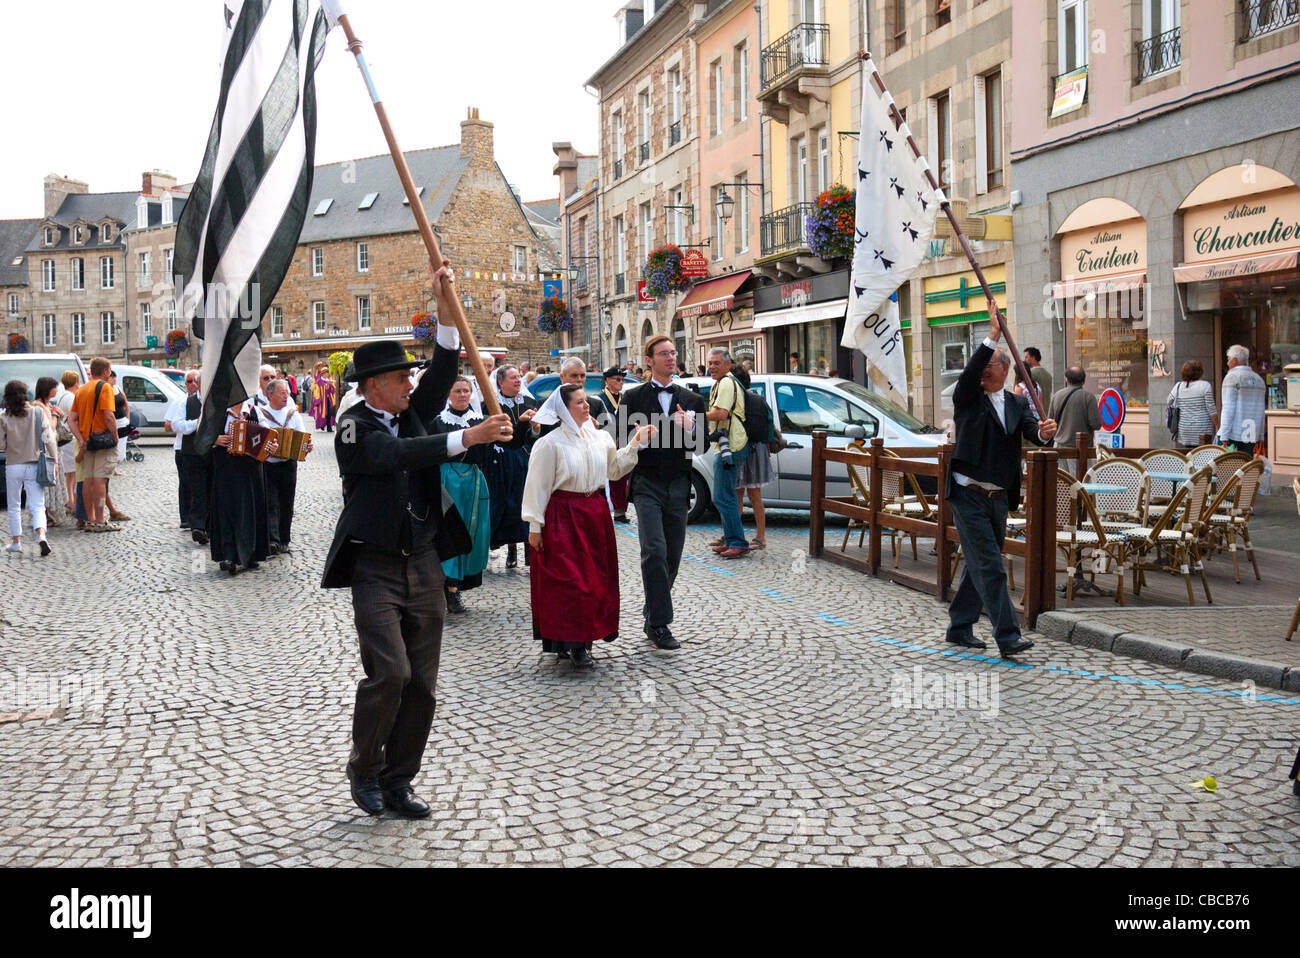 Parade in Paimpol brittany france Stock Photo